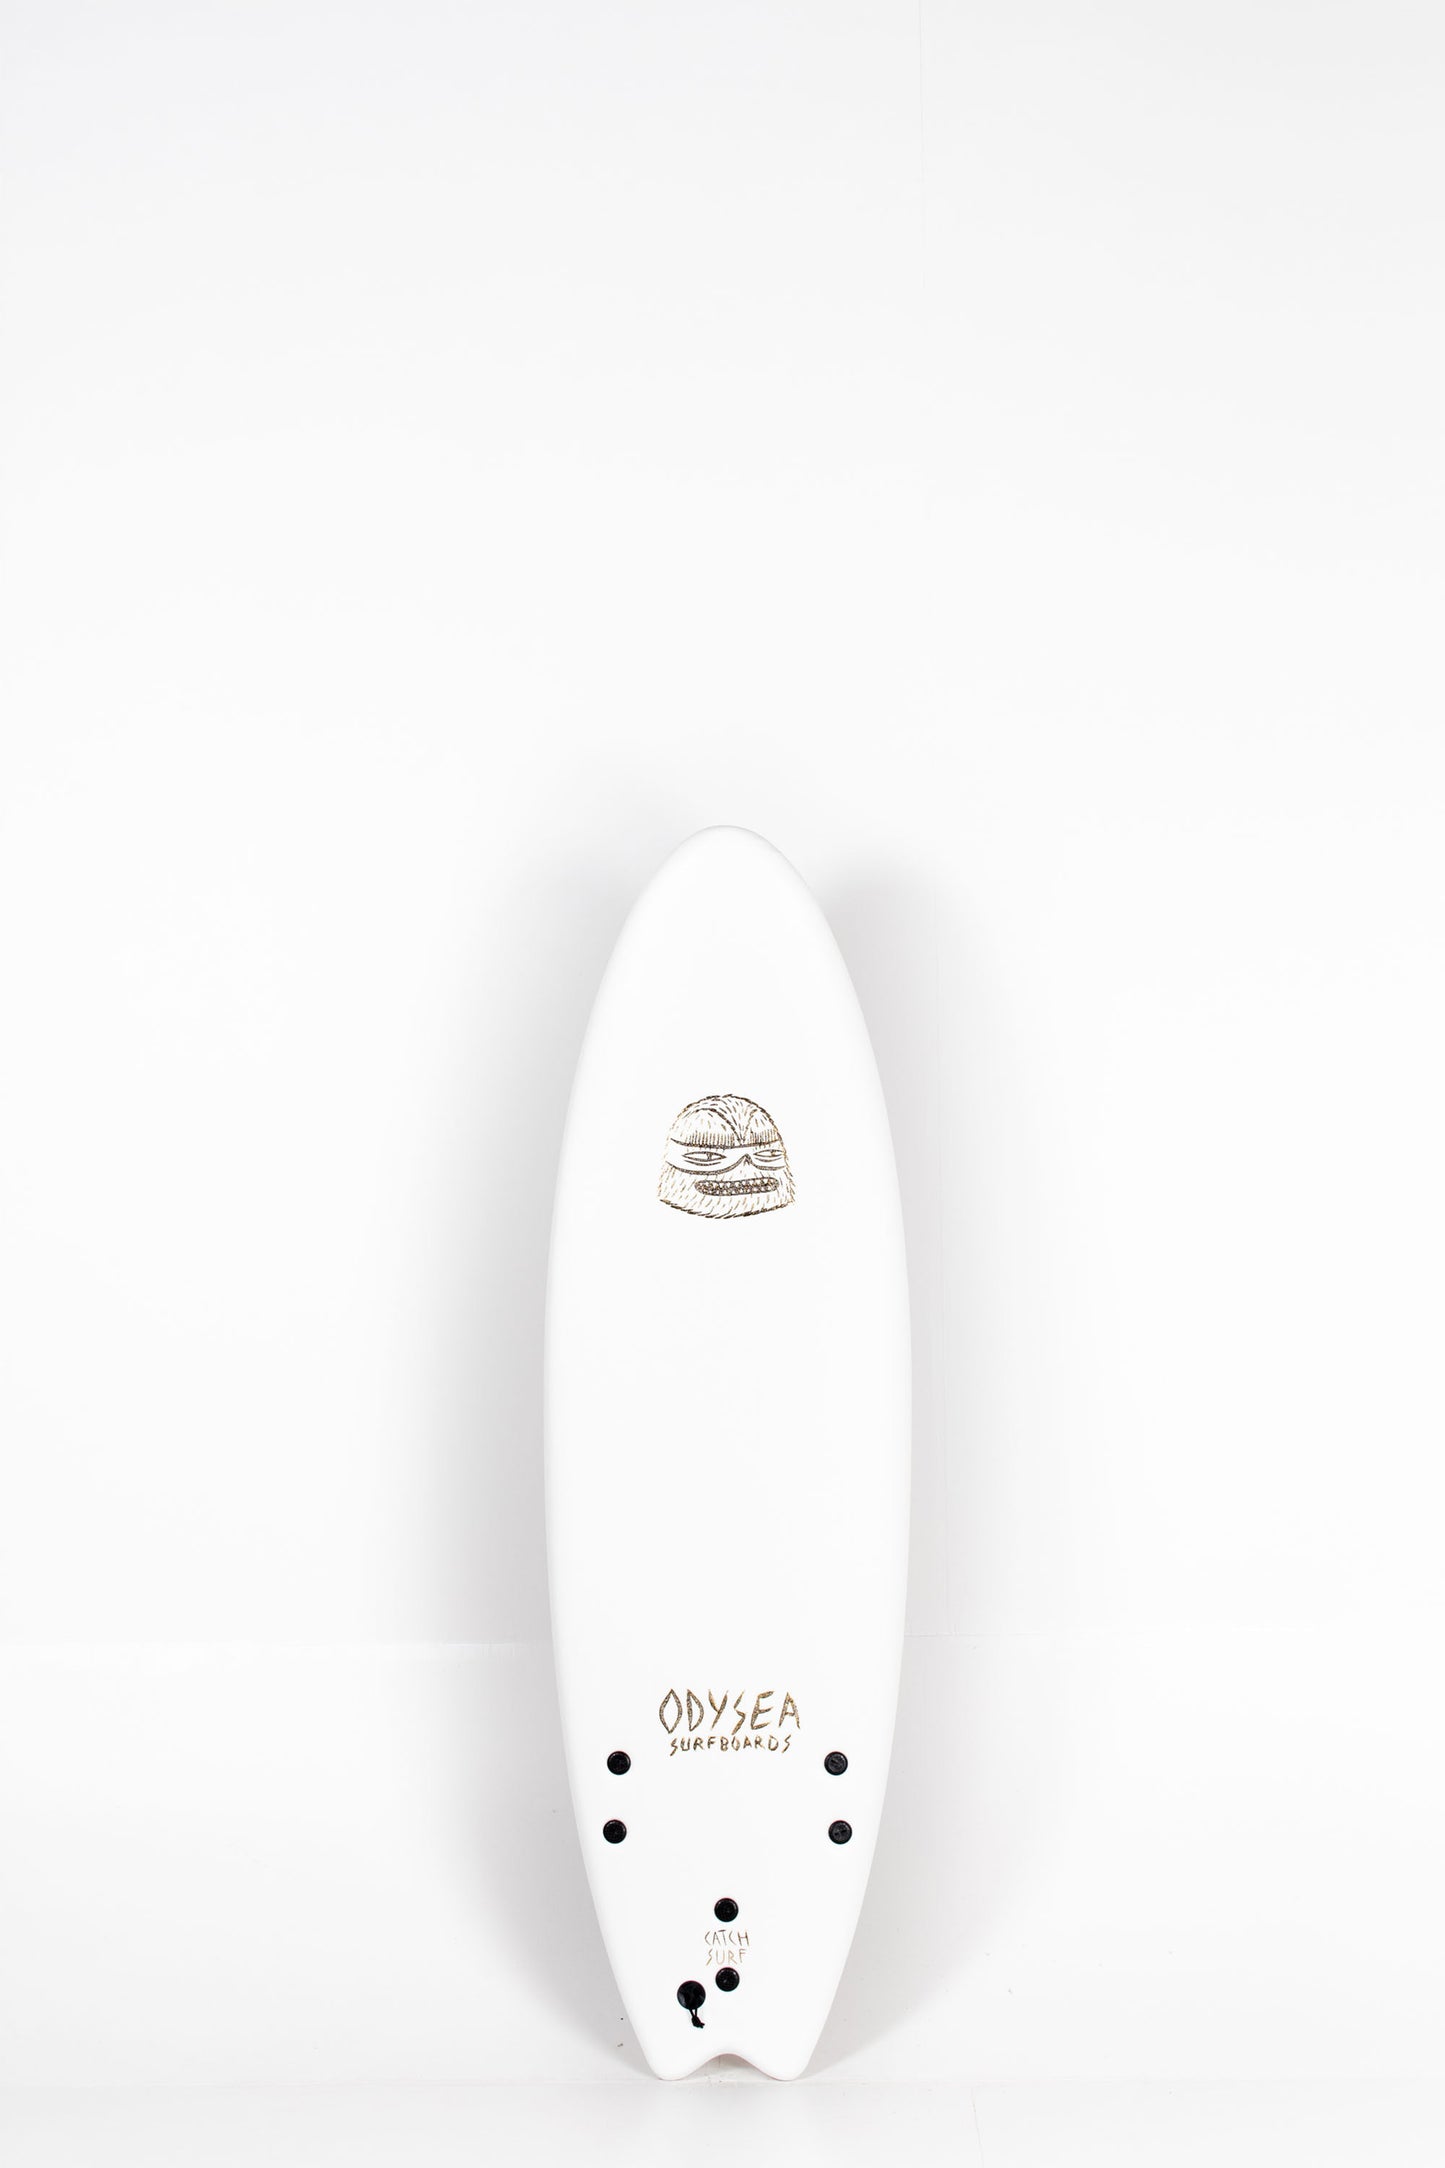 CATCH SURF ODYSEA SKIPPER x EVAN ROSSELL PRO | Buy at PUKAS SURF SHOP